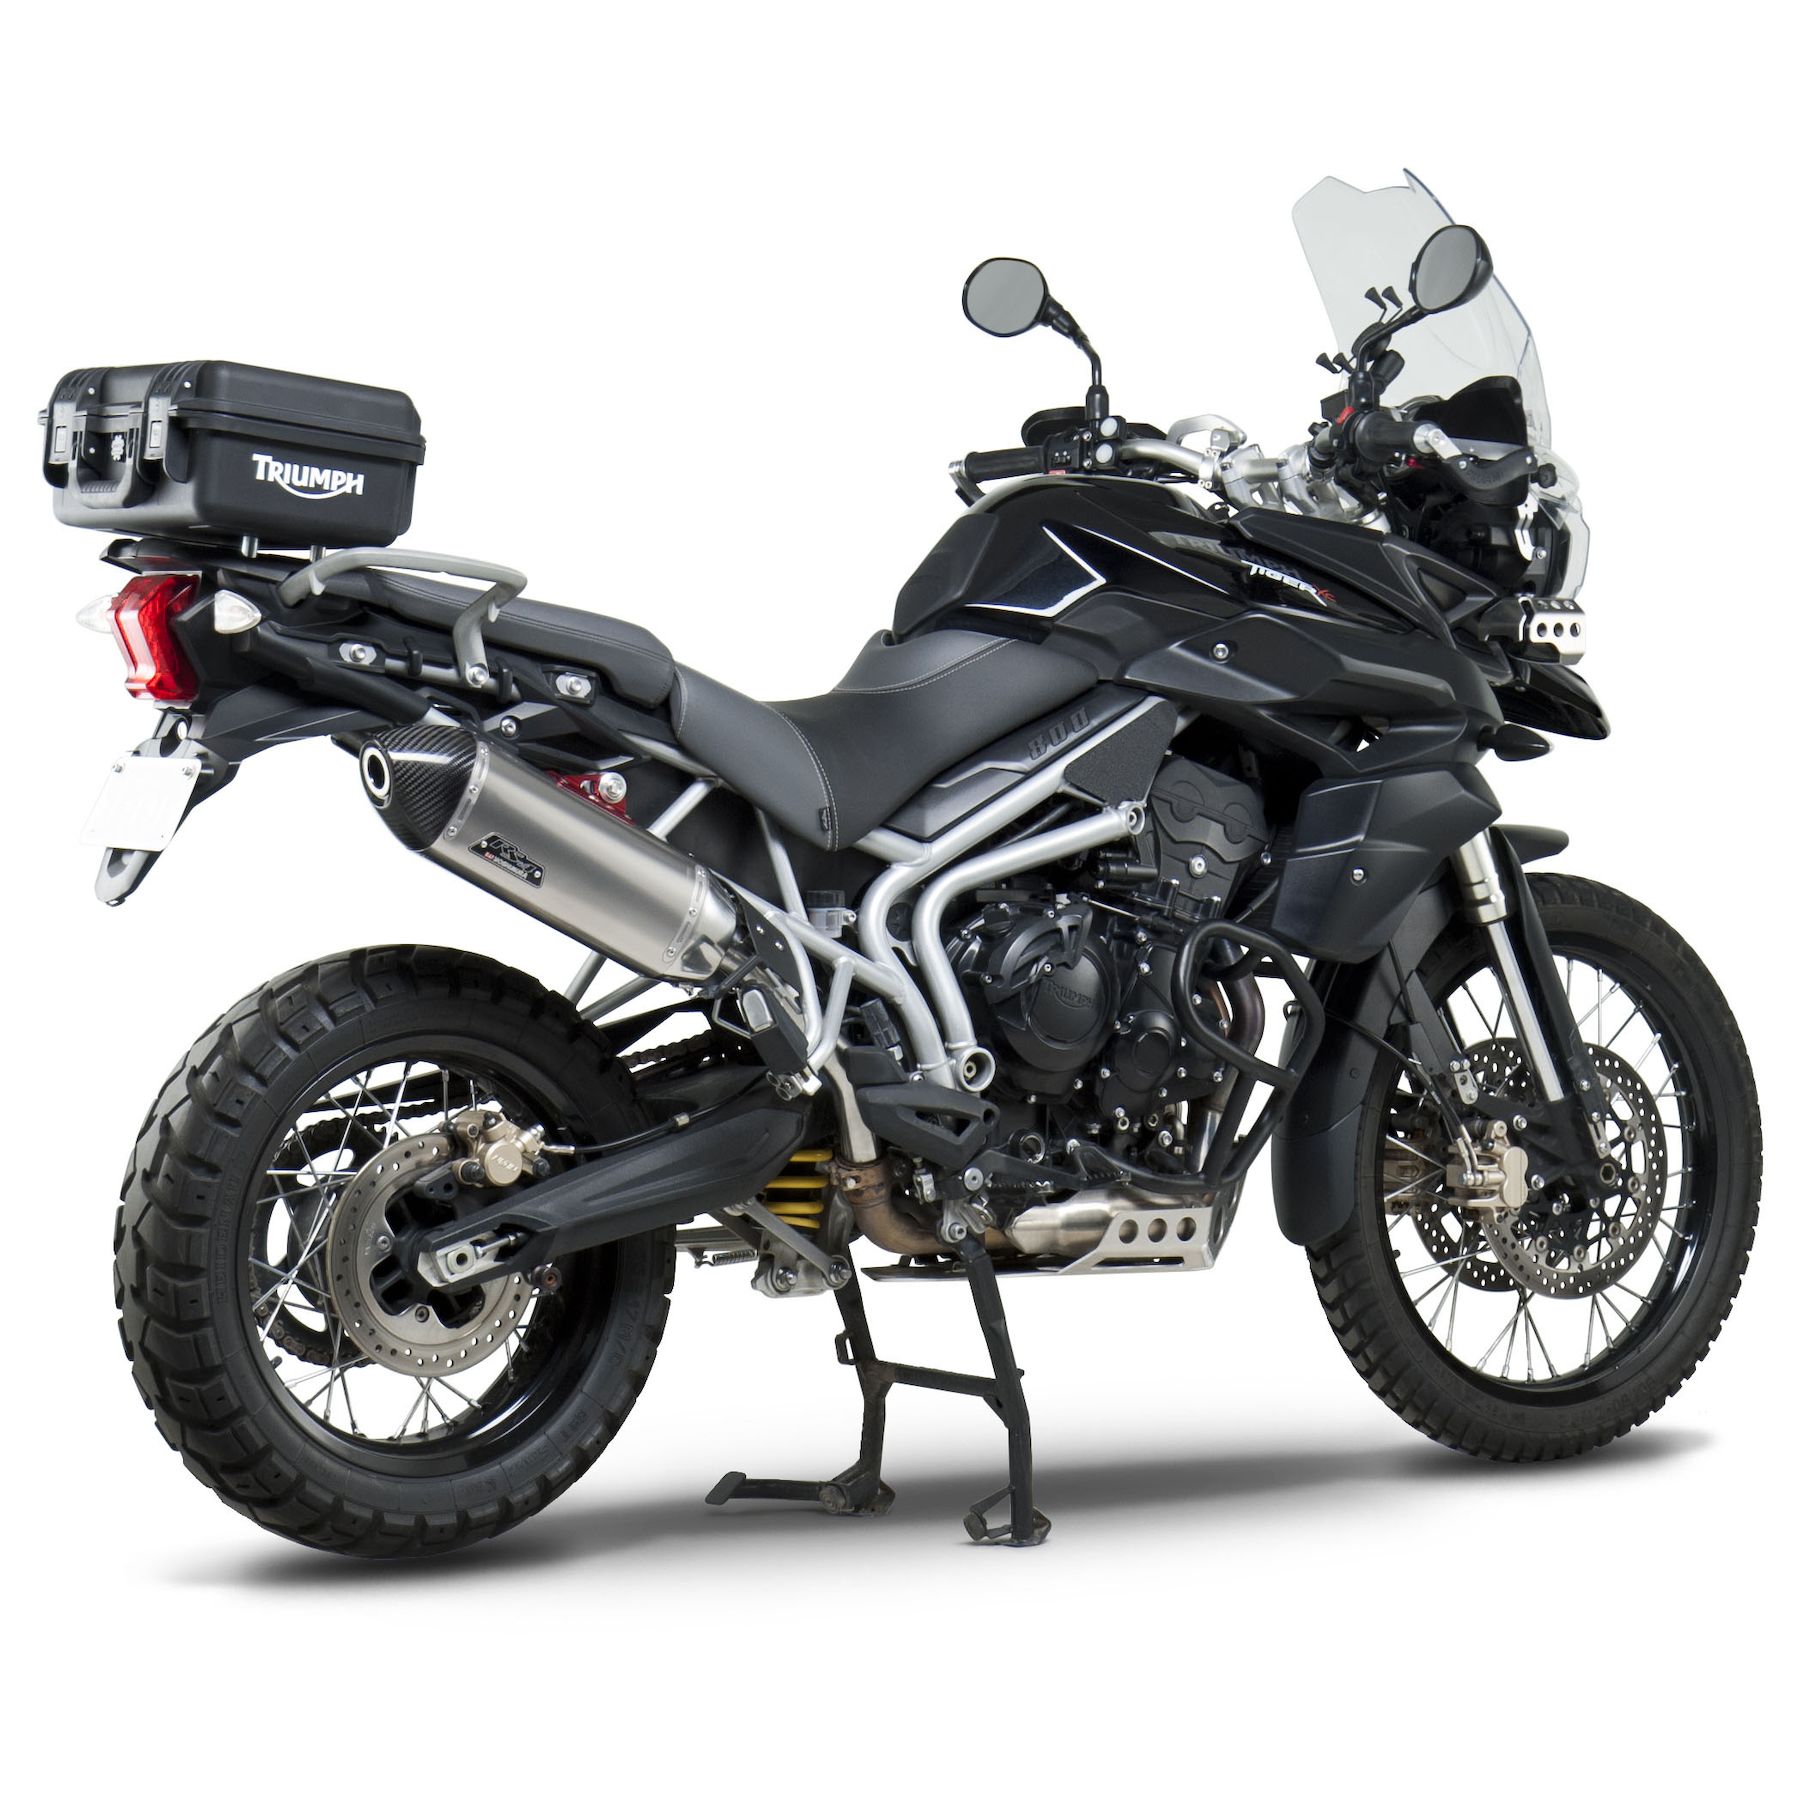 Yoshimura RS4 Street Slip-On Exhaust for Triumph Tiger 800